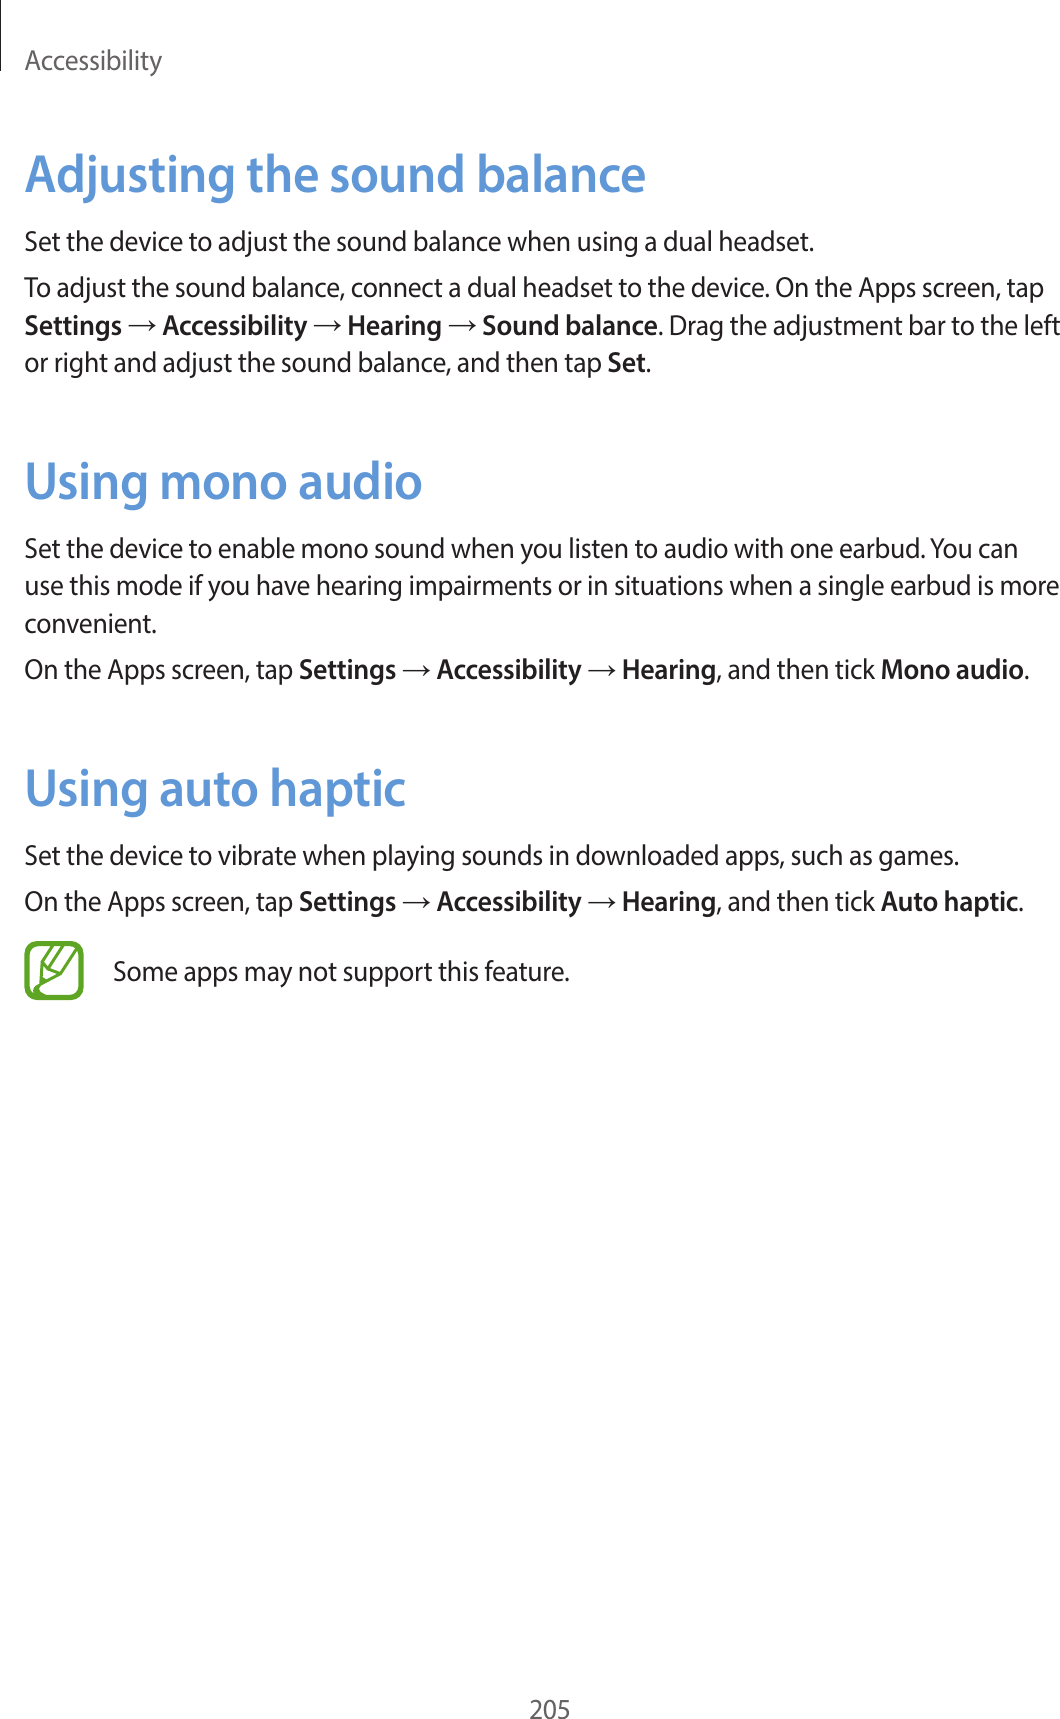 Accessibility205Adjusting the sound balanceSet the device to adjust the sound balance when using a dual headset.To adjust the sound balance, connect a dual headset to the device. On the Apps screen, tap Settings → Accessibility → Hearing → Sound balance. Drag the adjustment bar to the left or right and adjust the sound balance, and then tap Set.Using mono audioSet the device to enable mono sound when you listen to audio with one earbud. You can use this mode if you have hearing impairments or in situations when a single earbud is more convenient.On the Apps screen, tap Settings → Accessibility → Hearing, and then tick Mono audio.Using auto hapticSet the device to vibrate when playing sounds in downloaded apps, such as games.On the Apps screen, tap Settings → Accessibility → Hearing, and then tick Auto haptic.Some apps may not support this feature.